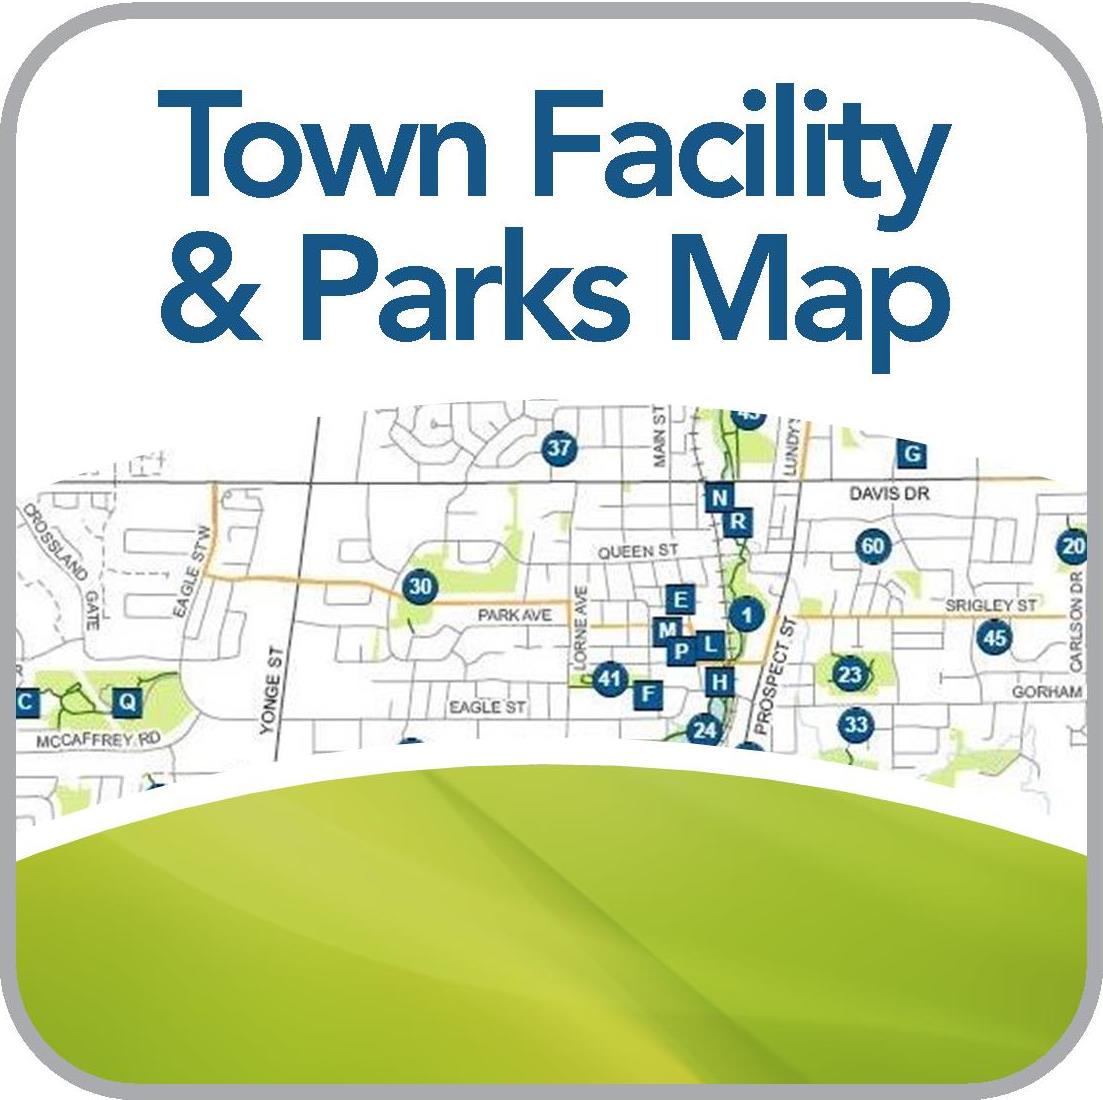 Map of Town Facilities, Parks, and Trails